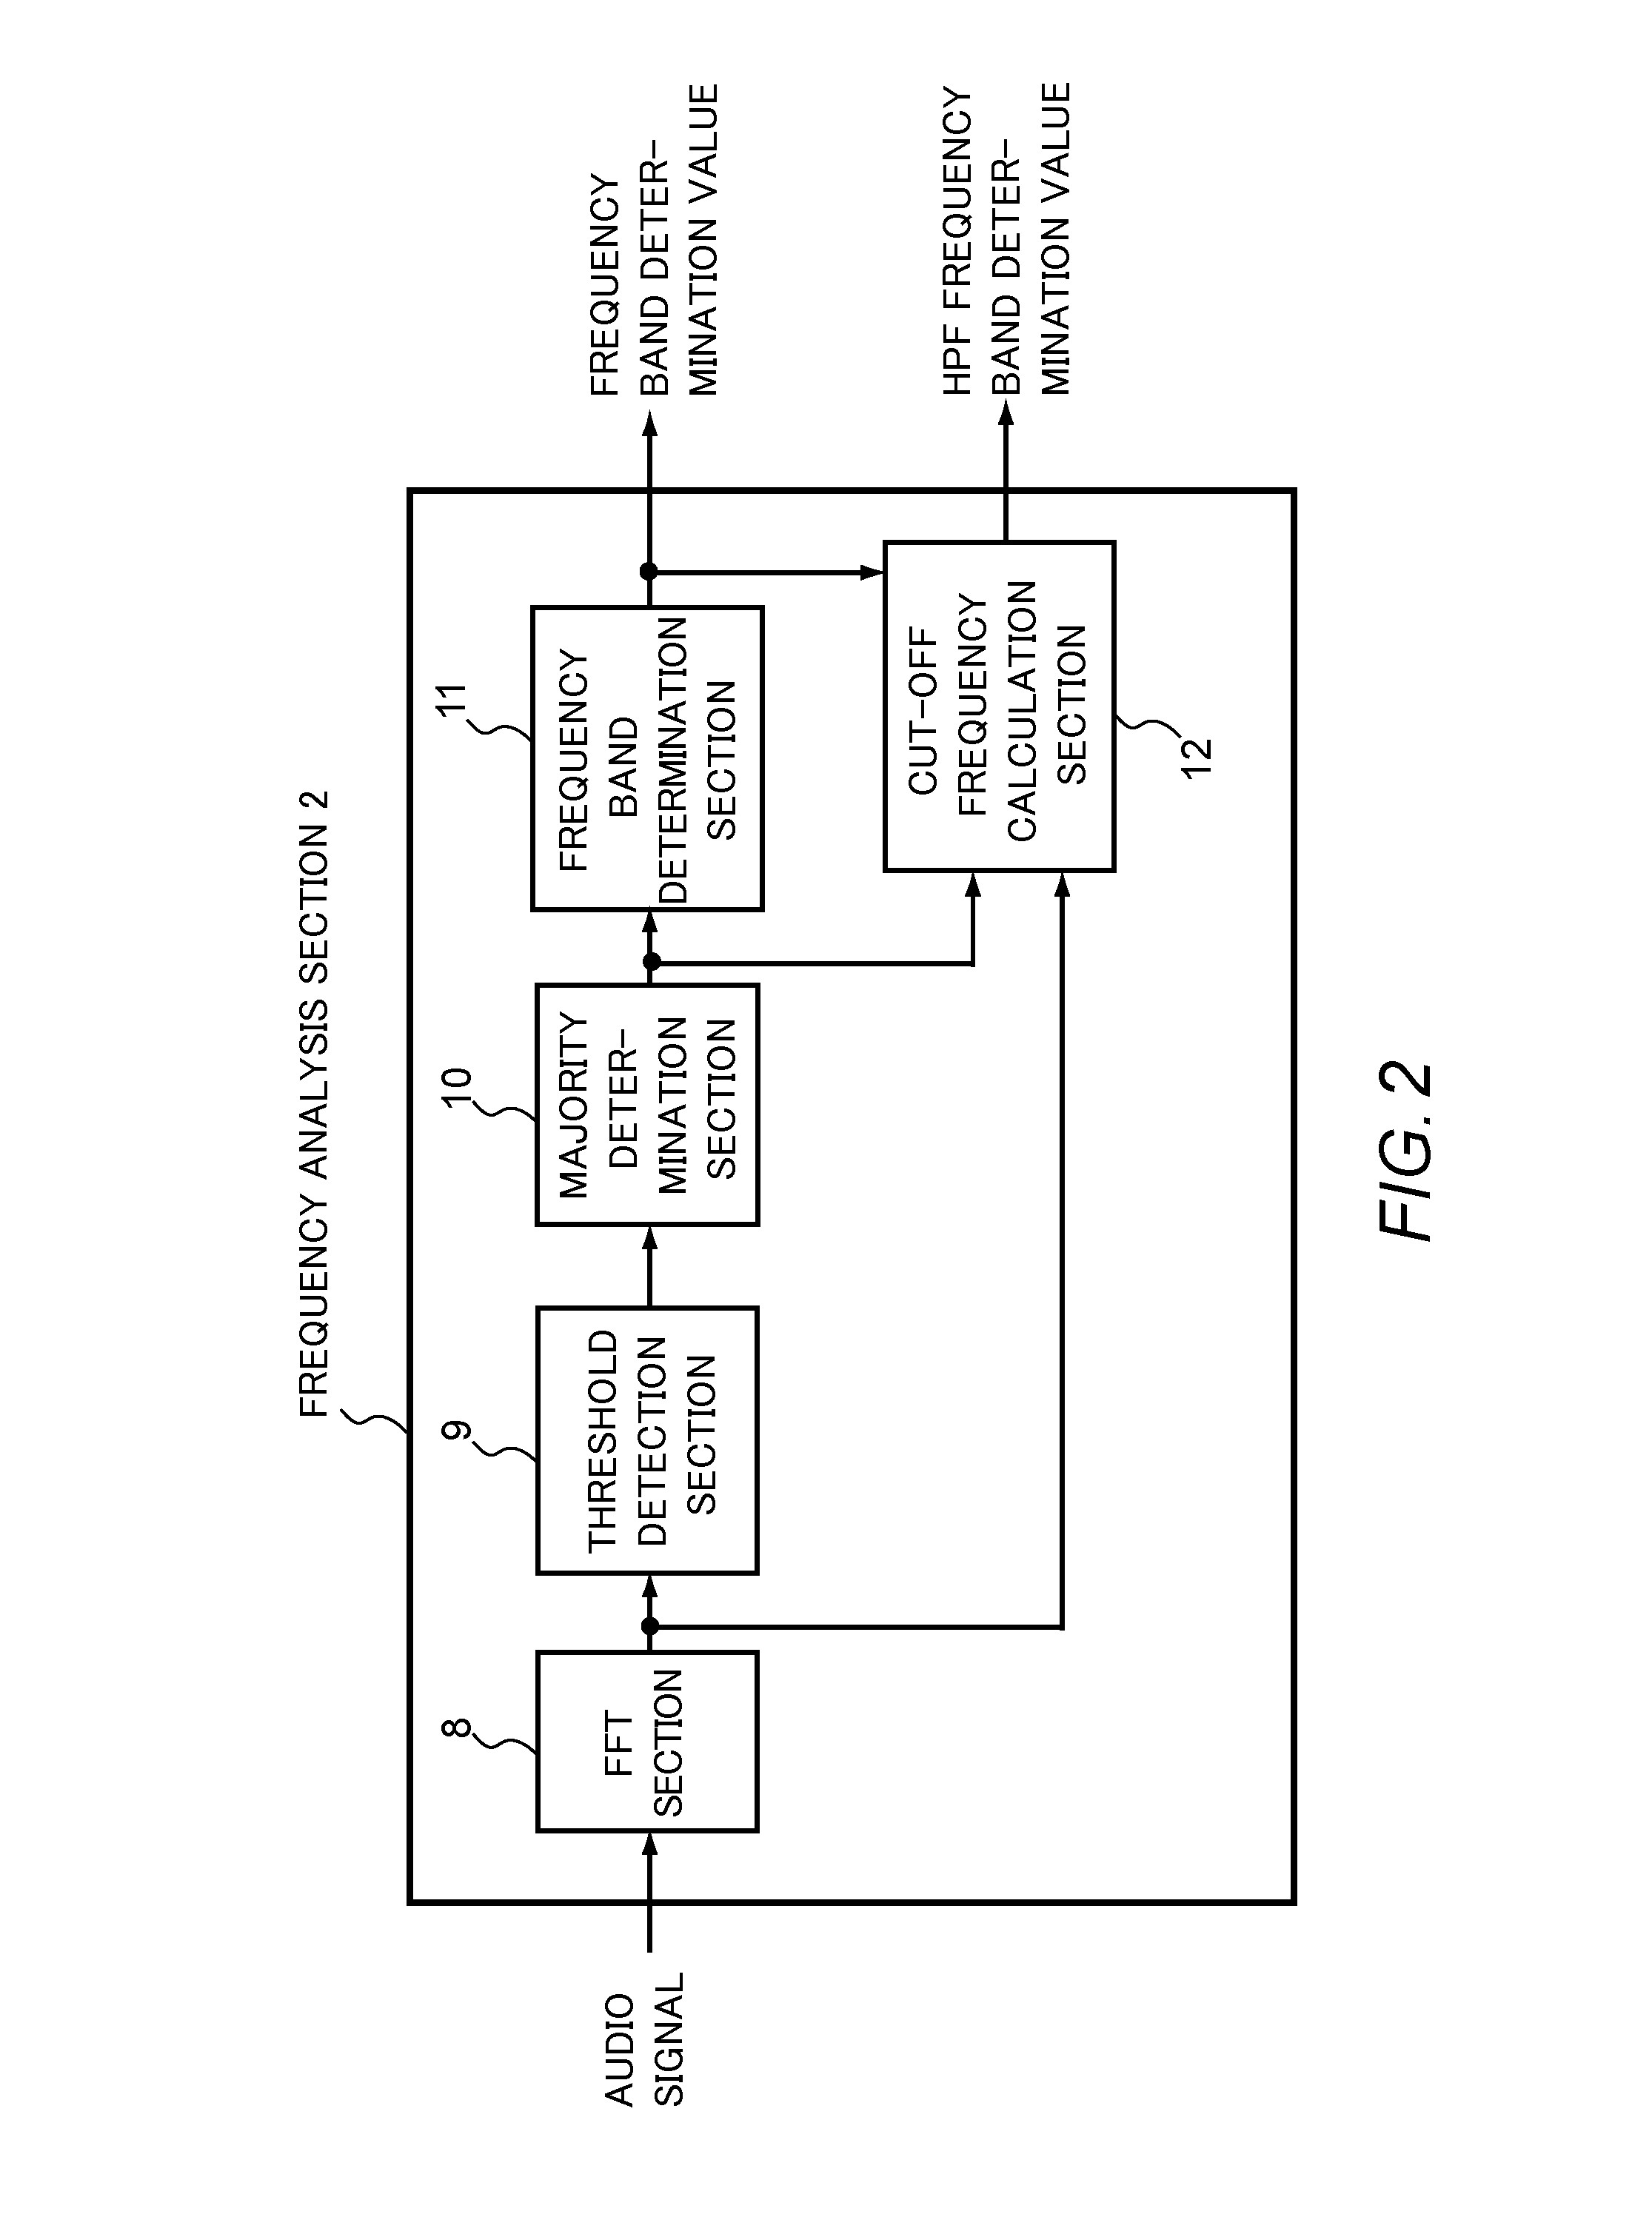 High-frequency interpolation device and high-frequency interpolation method